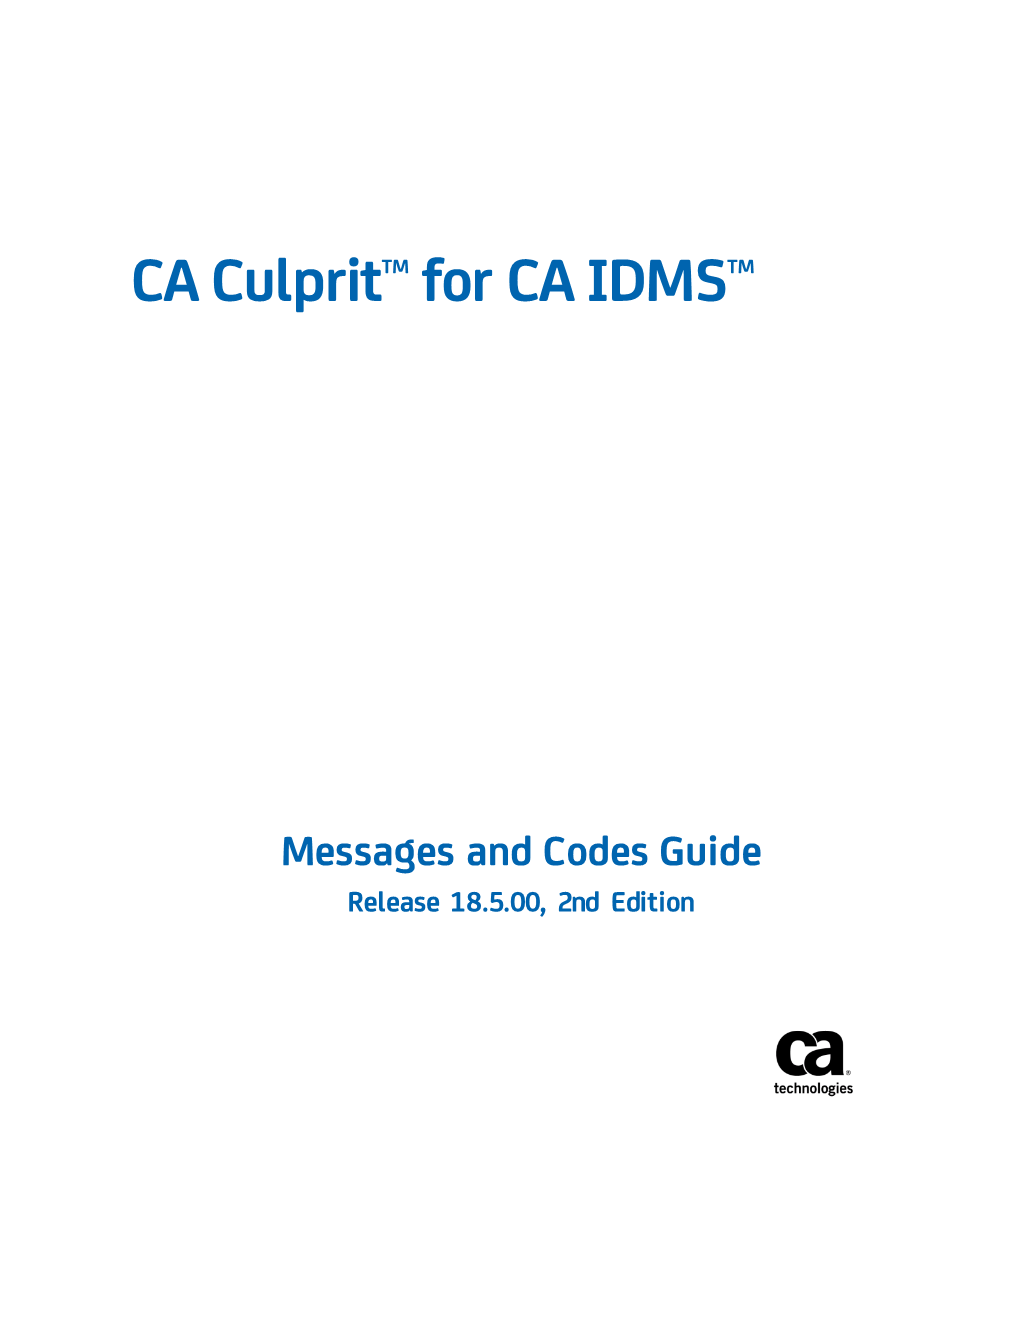 CA Culprit for CA IDMS Messages and Codes Guide